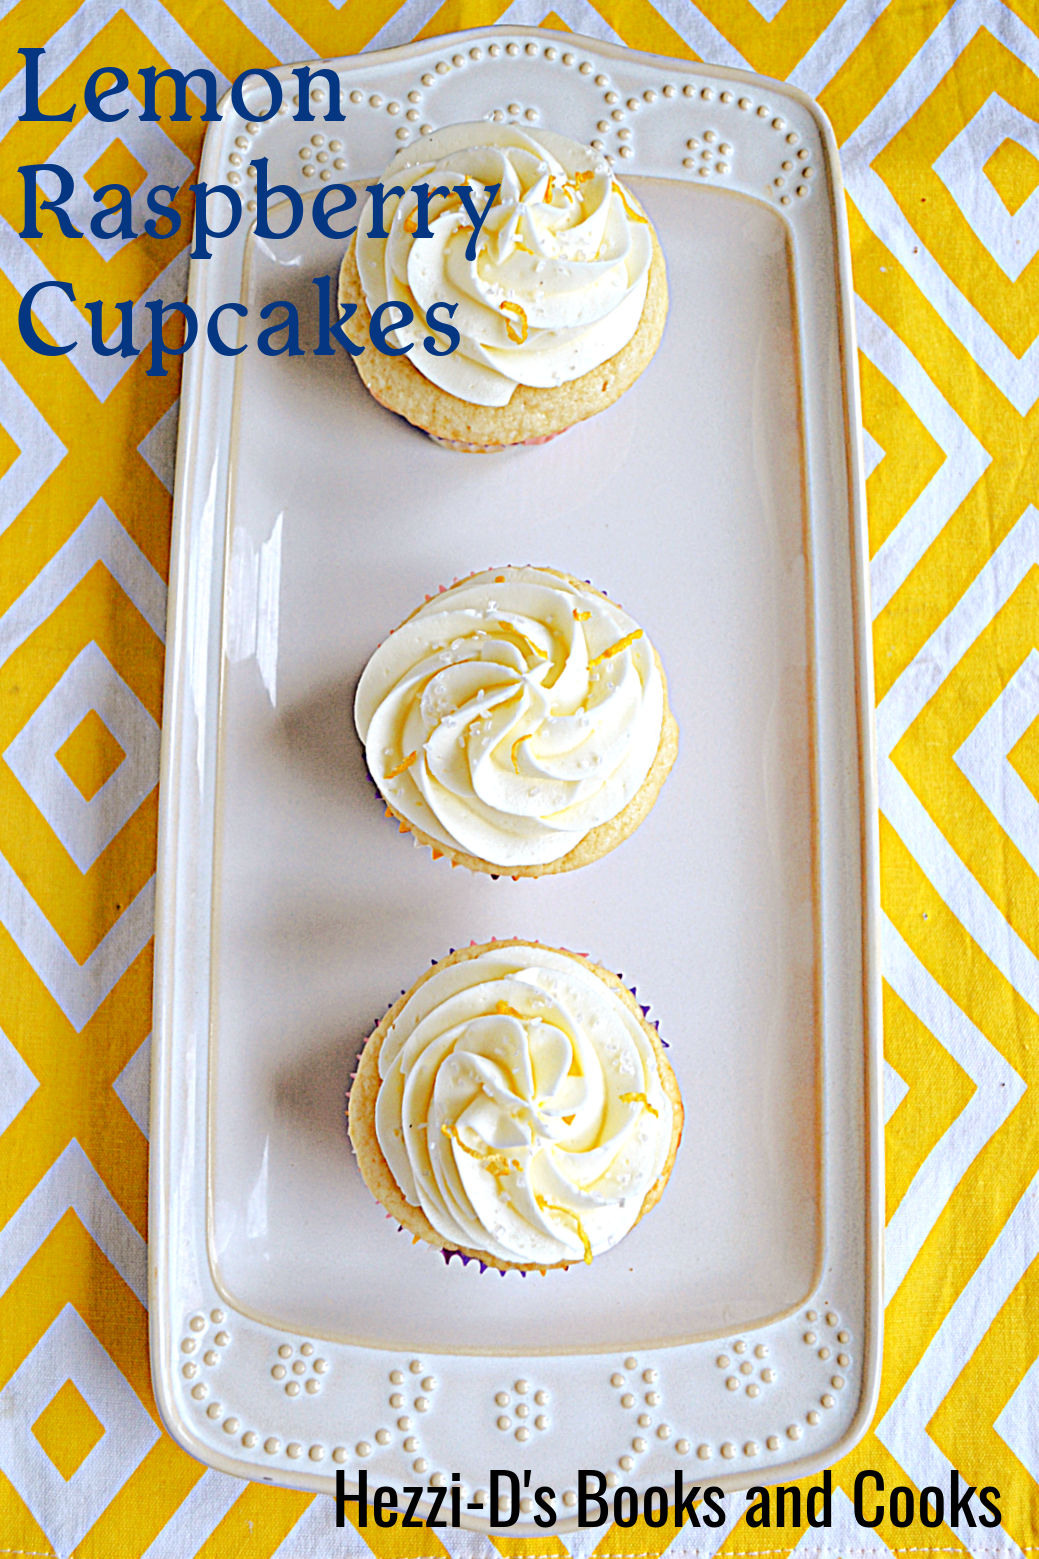 Delicious lemon and vanilla flavored cupcakes studded with fresh raspberries and topped off with a fluffy lemon buttercream frosting.